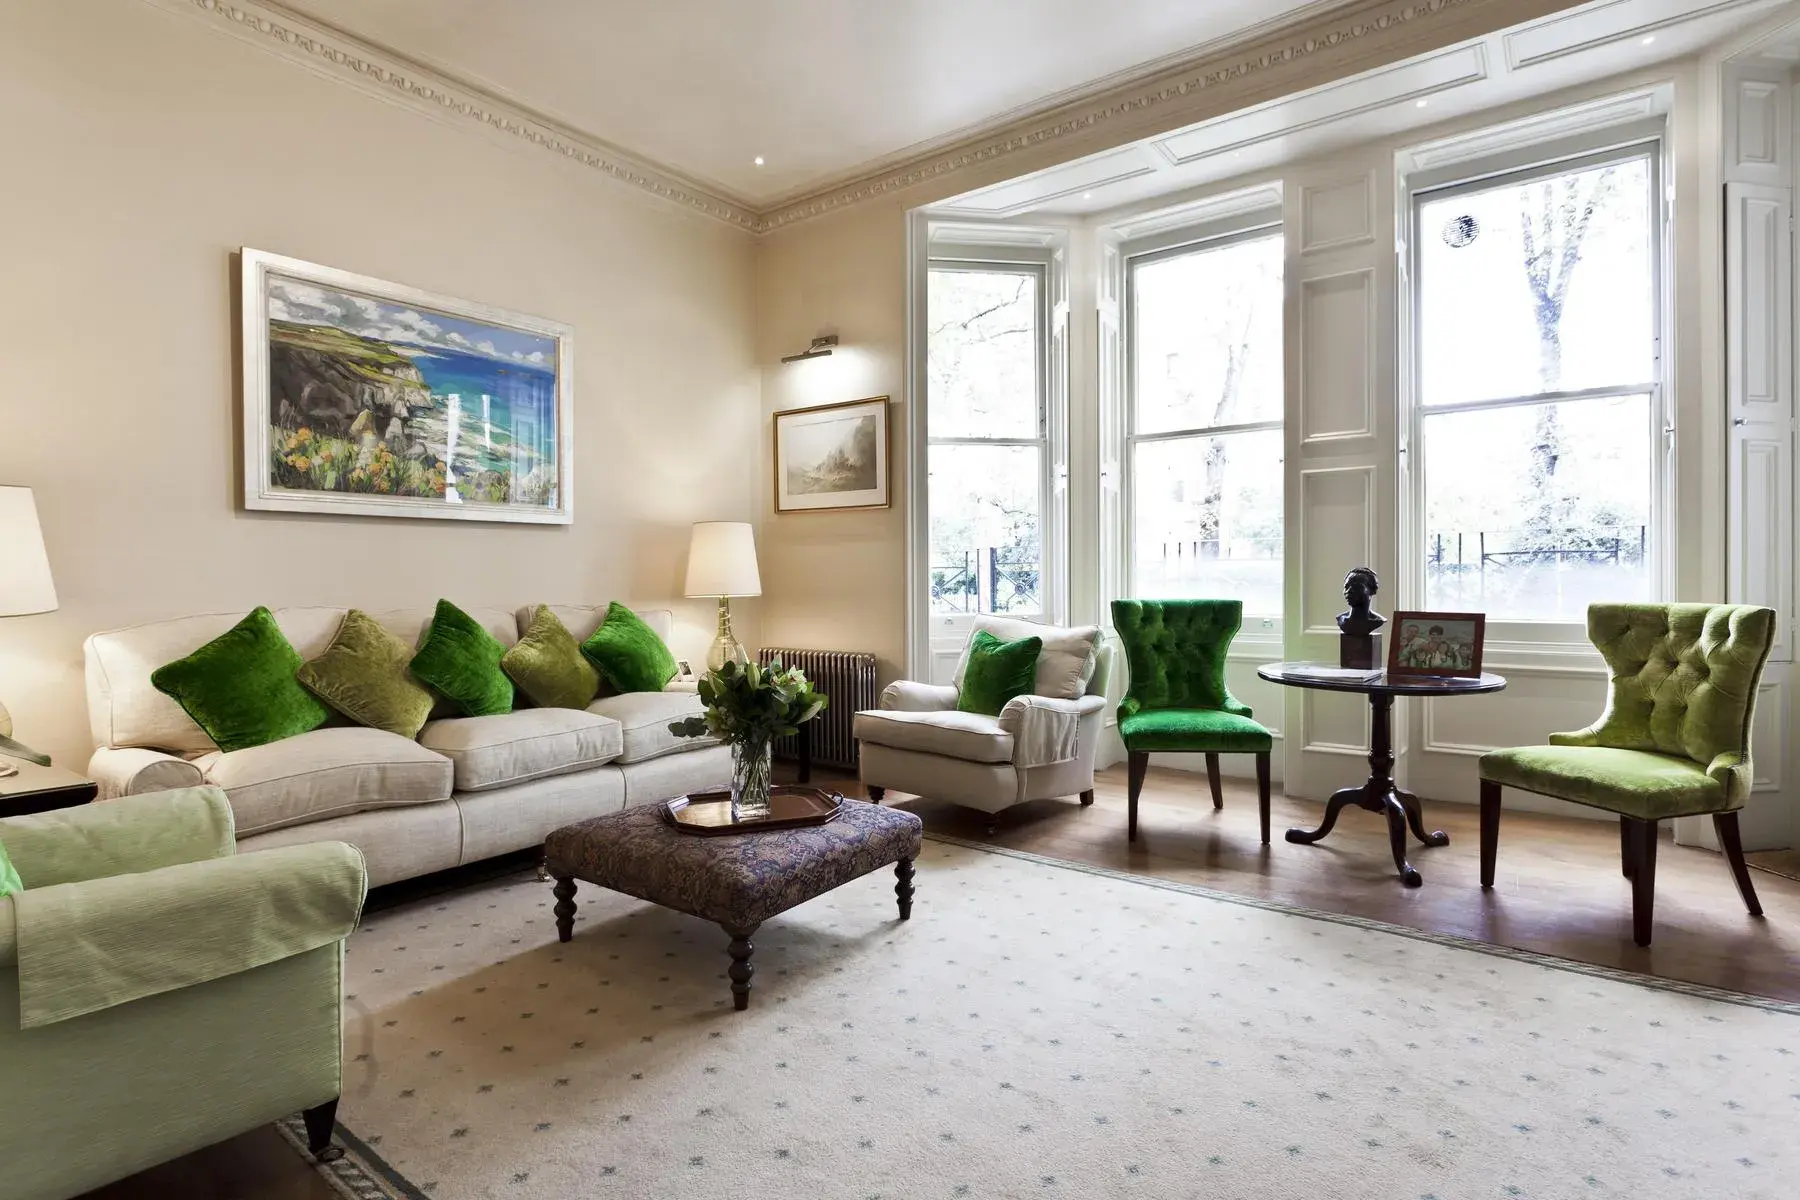 Gledhow Gardens, holiday home in South Kensington, London